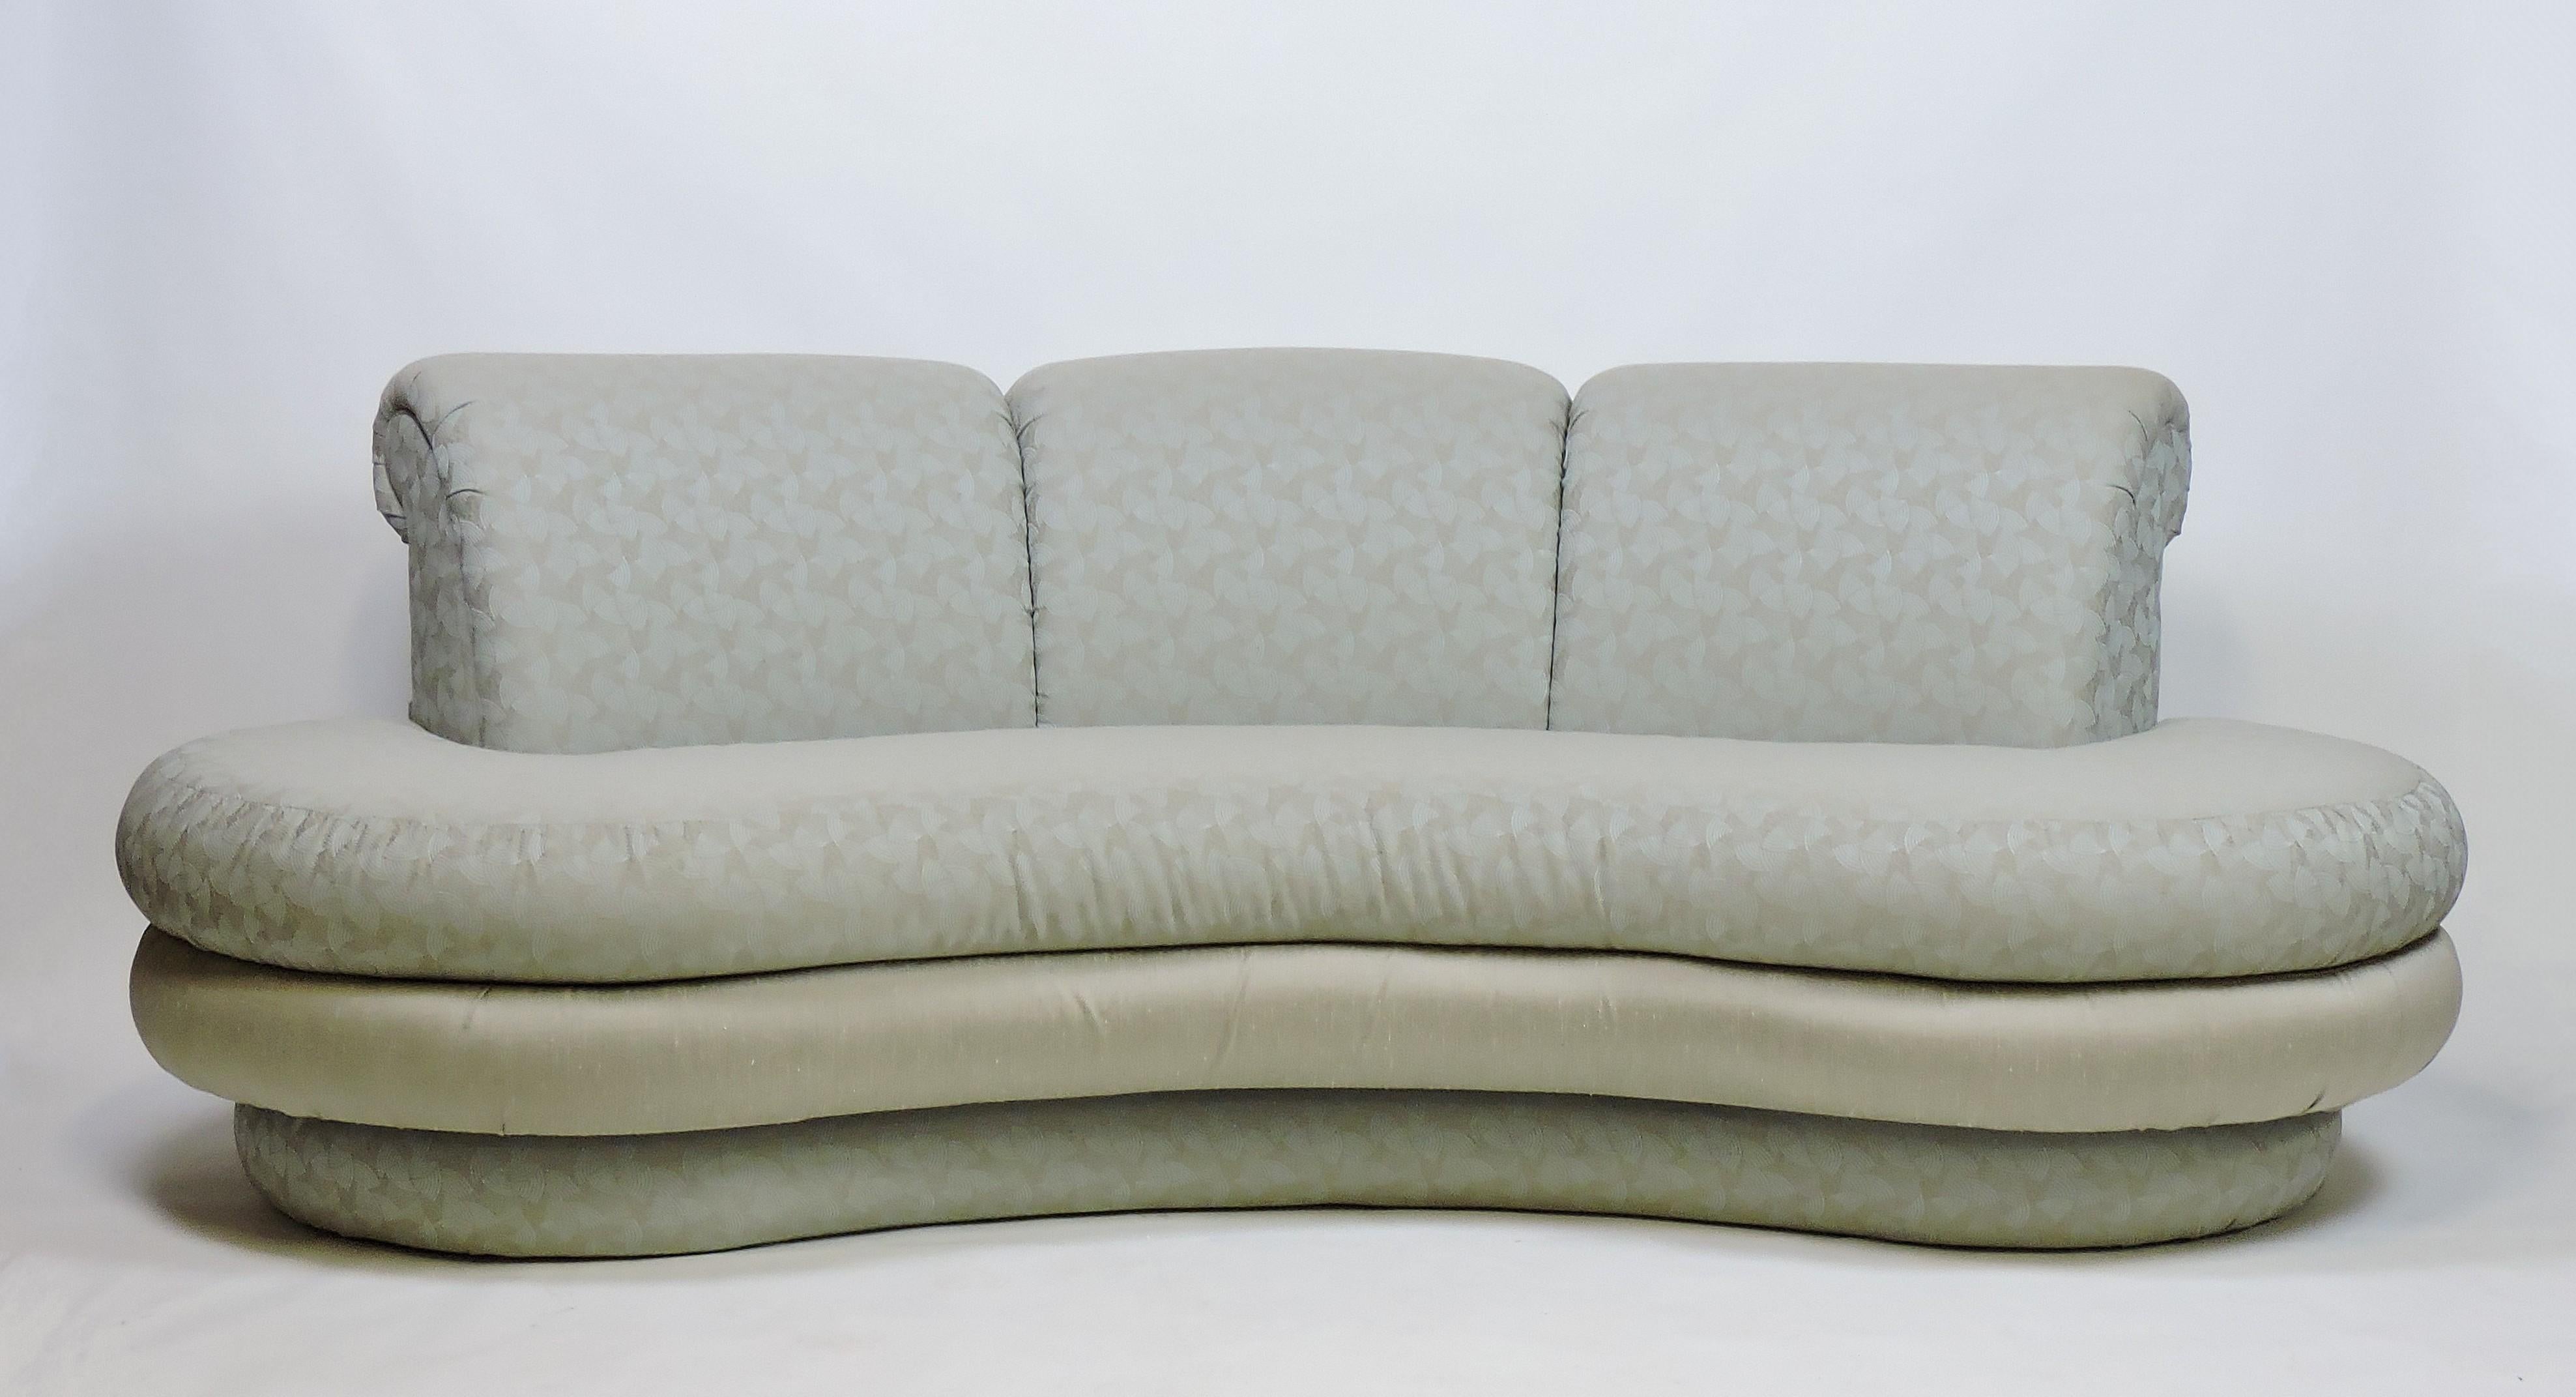 Wonderful pair of kidney shaped sofas designed by Adrian Pearsall and made by Comfort Designs. These sofas have a beautiful curvaceous and sculptural design and the original two-toned high quality upholstery. Price is per sofa, one has been sold.
 